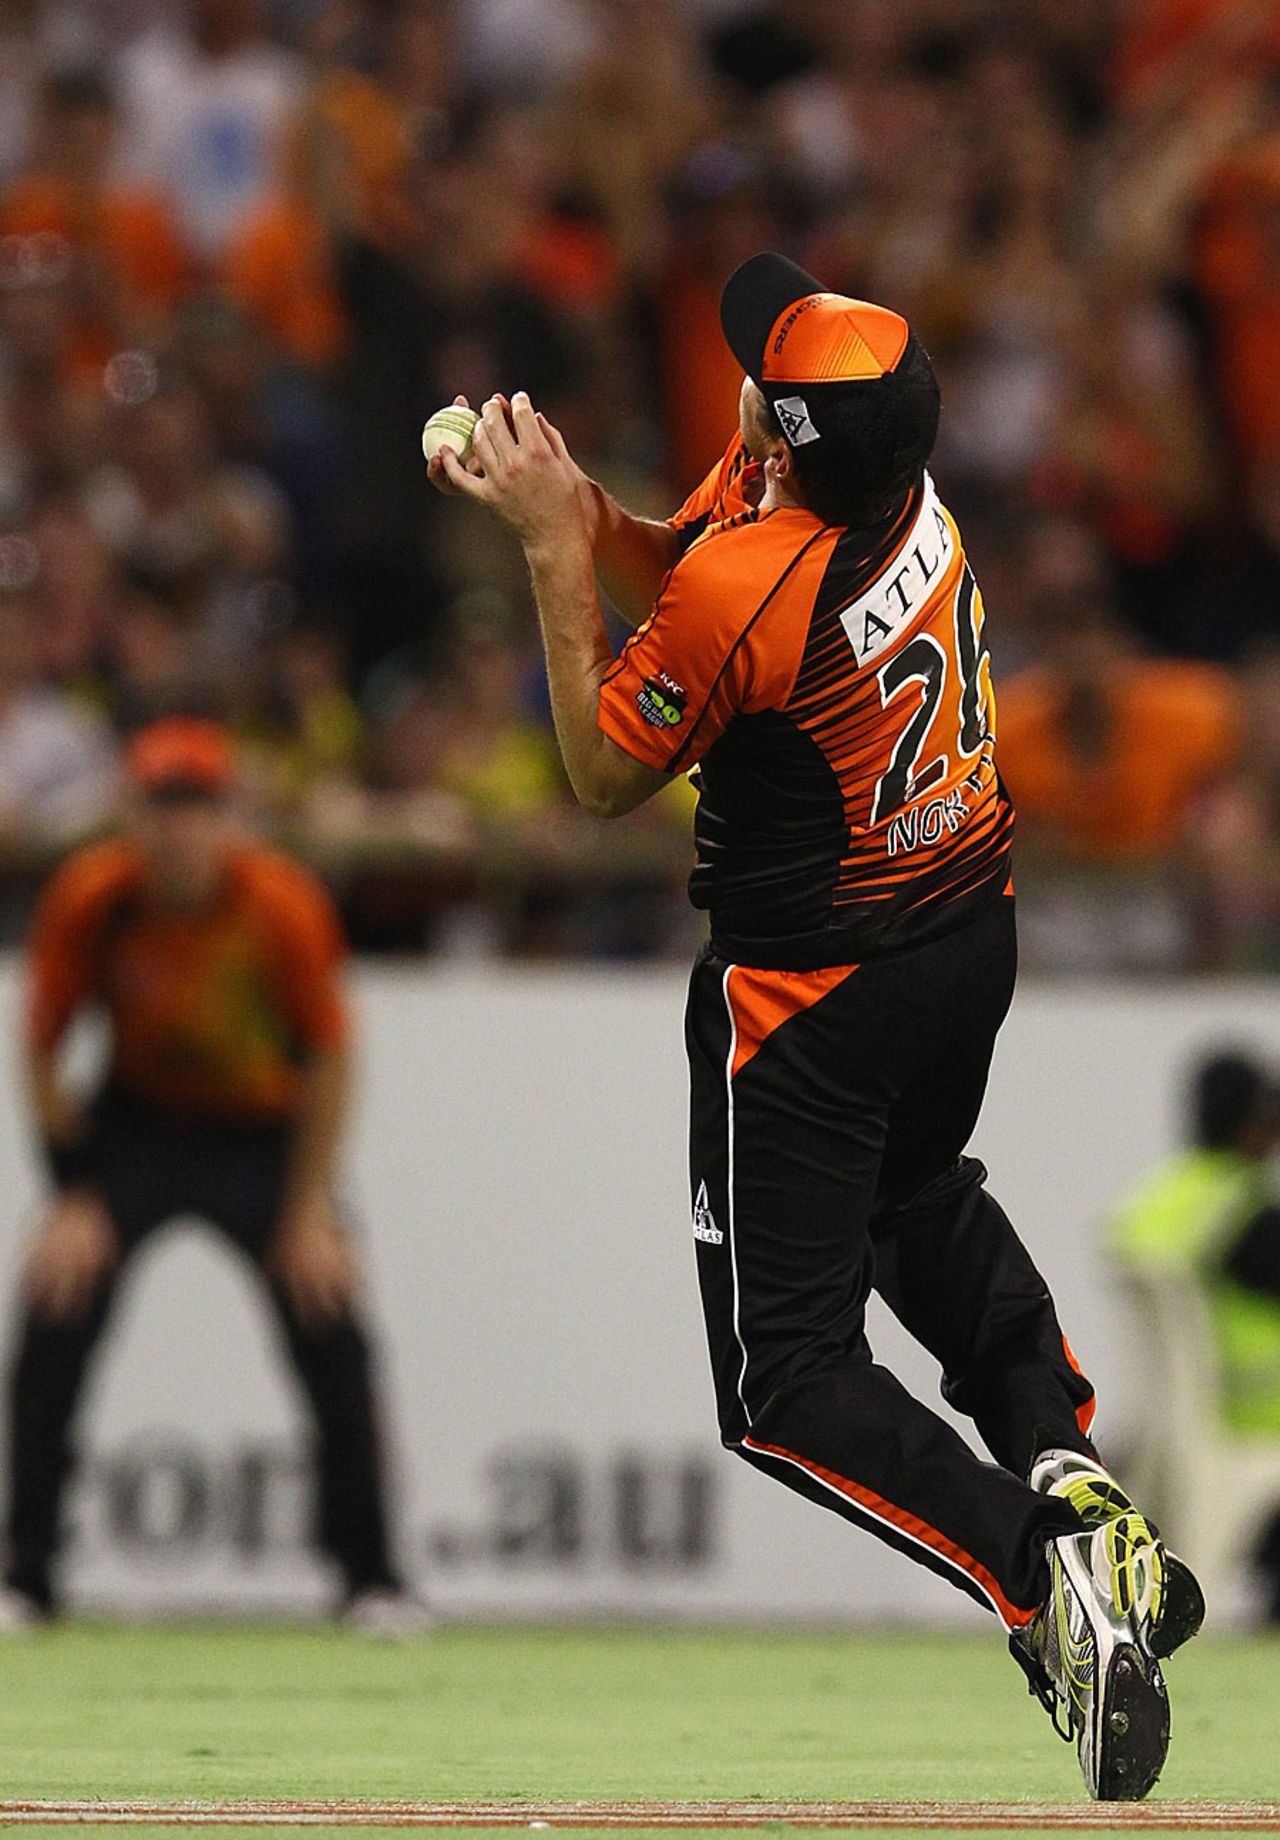 Marcus North takes a catch to send Nic Maddinson on his way, Perth Scorchers v Sydney Sixers, BBL 2011-12 final, Perth, January 28, 2012 